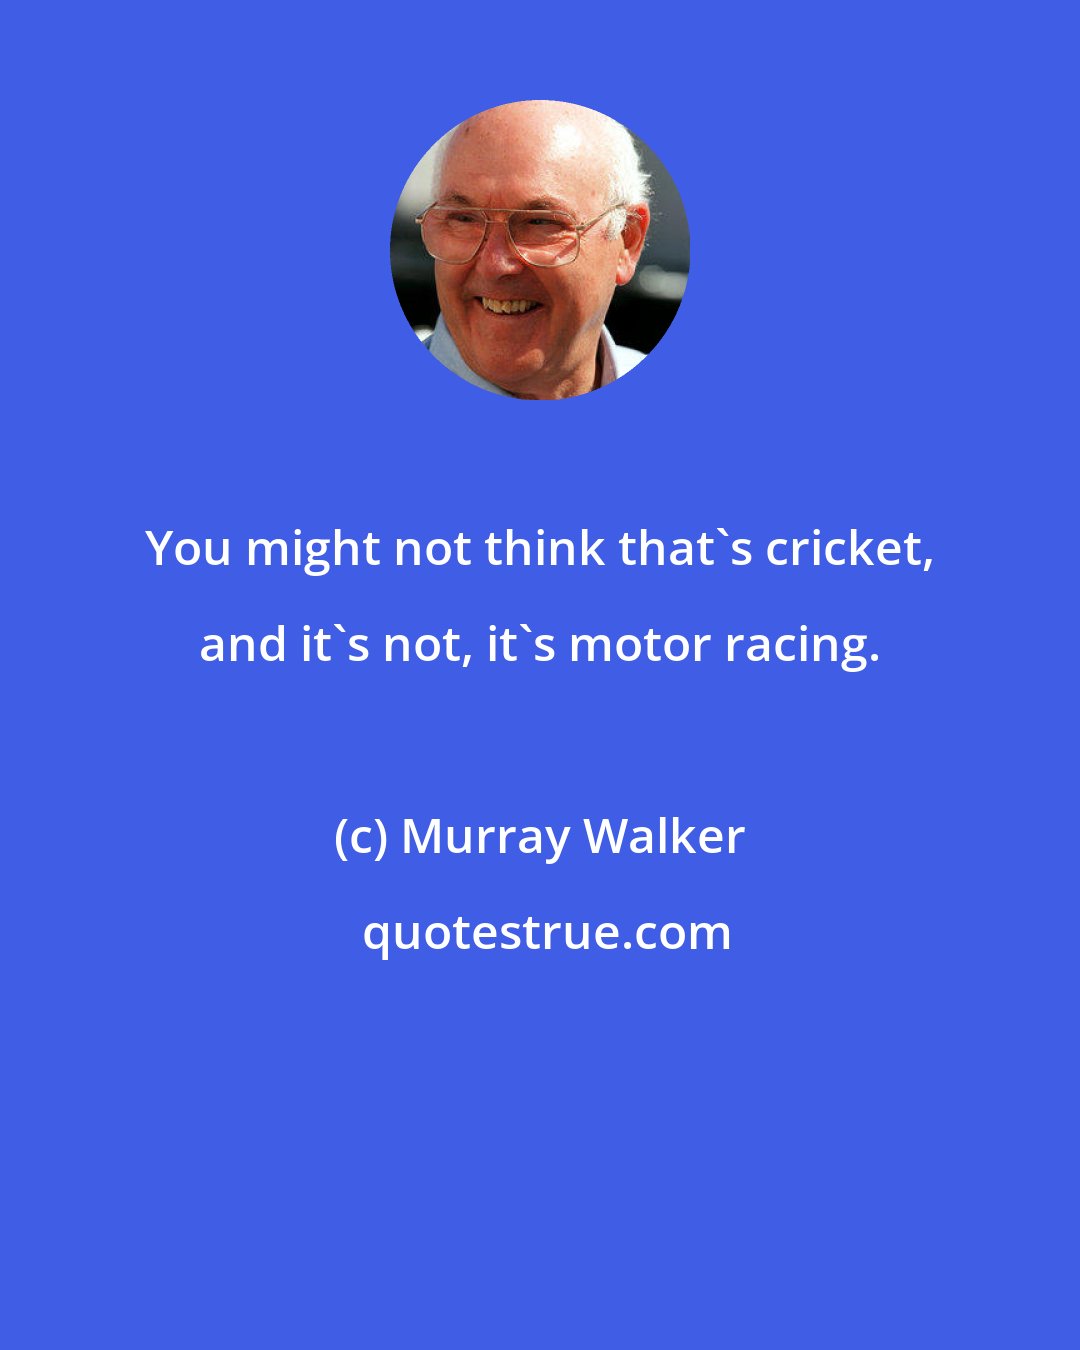 Murray Walker: You might not think that's cricket, and it's not, it's motor racing.